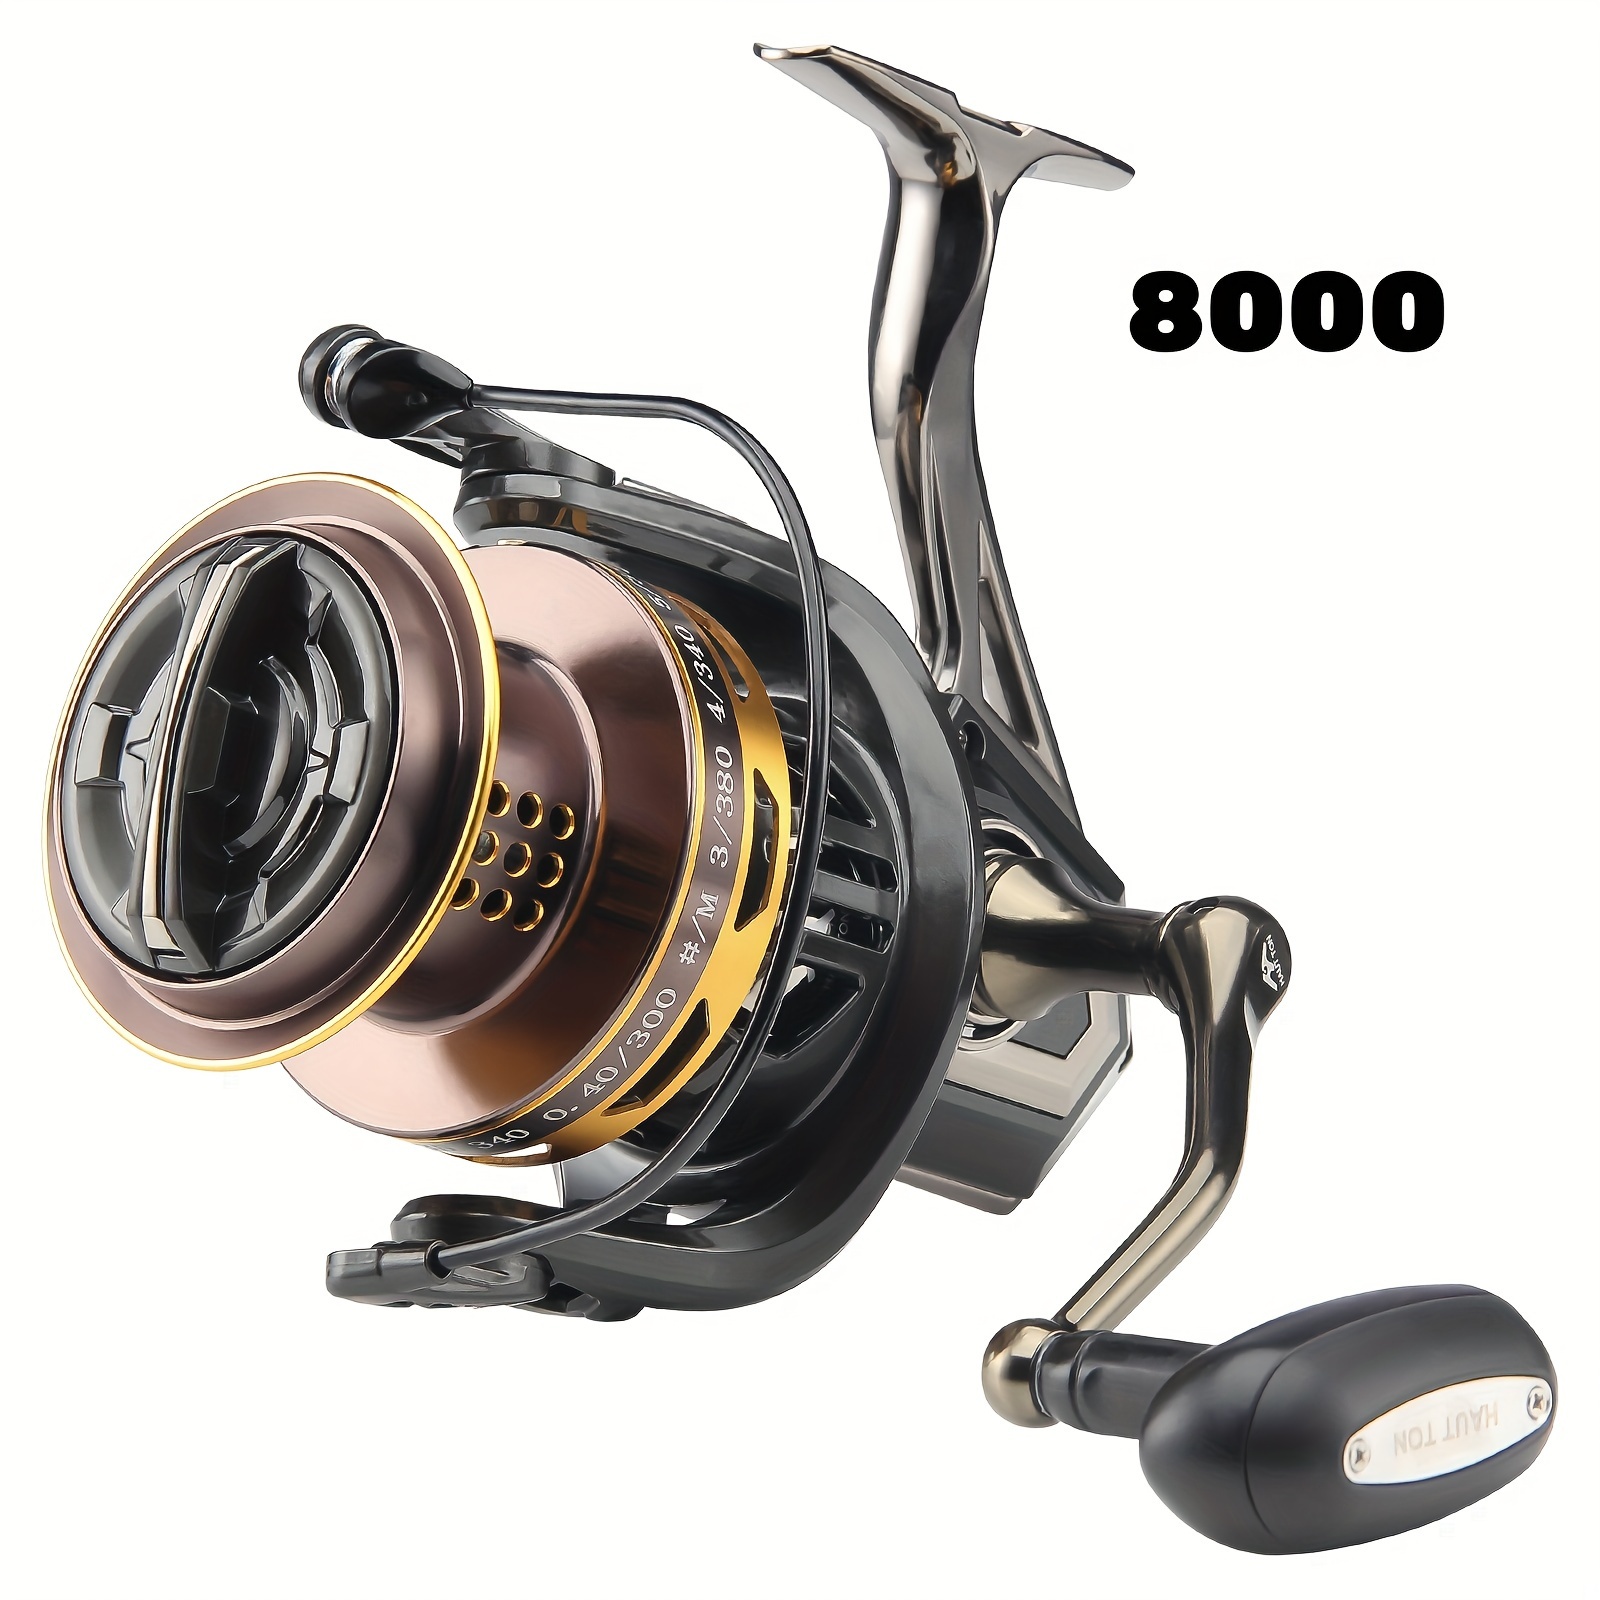 What size reel should a beginner purchase for inshore saltwater